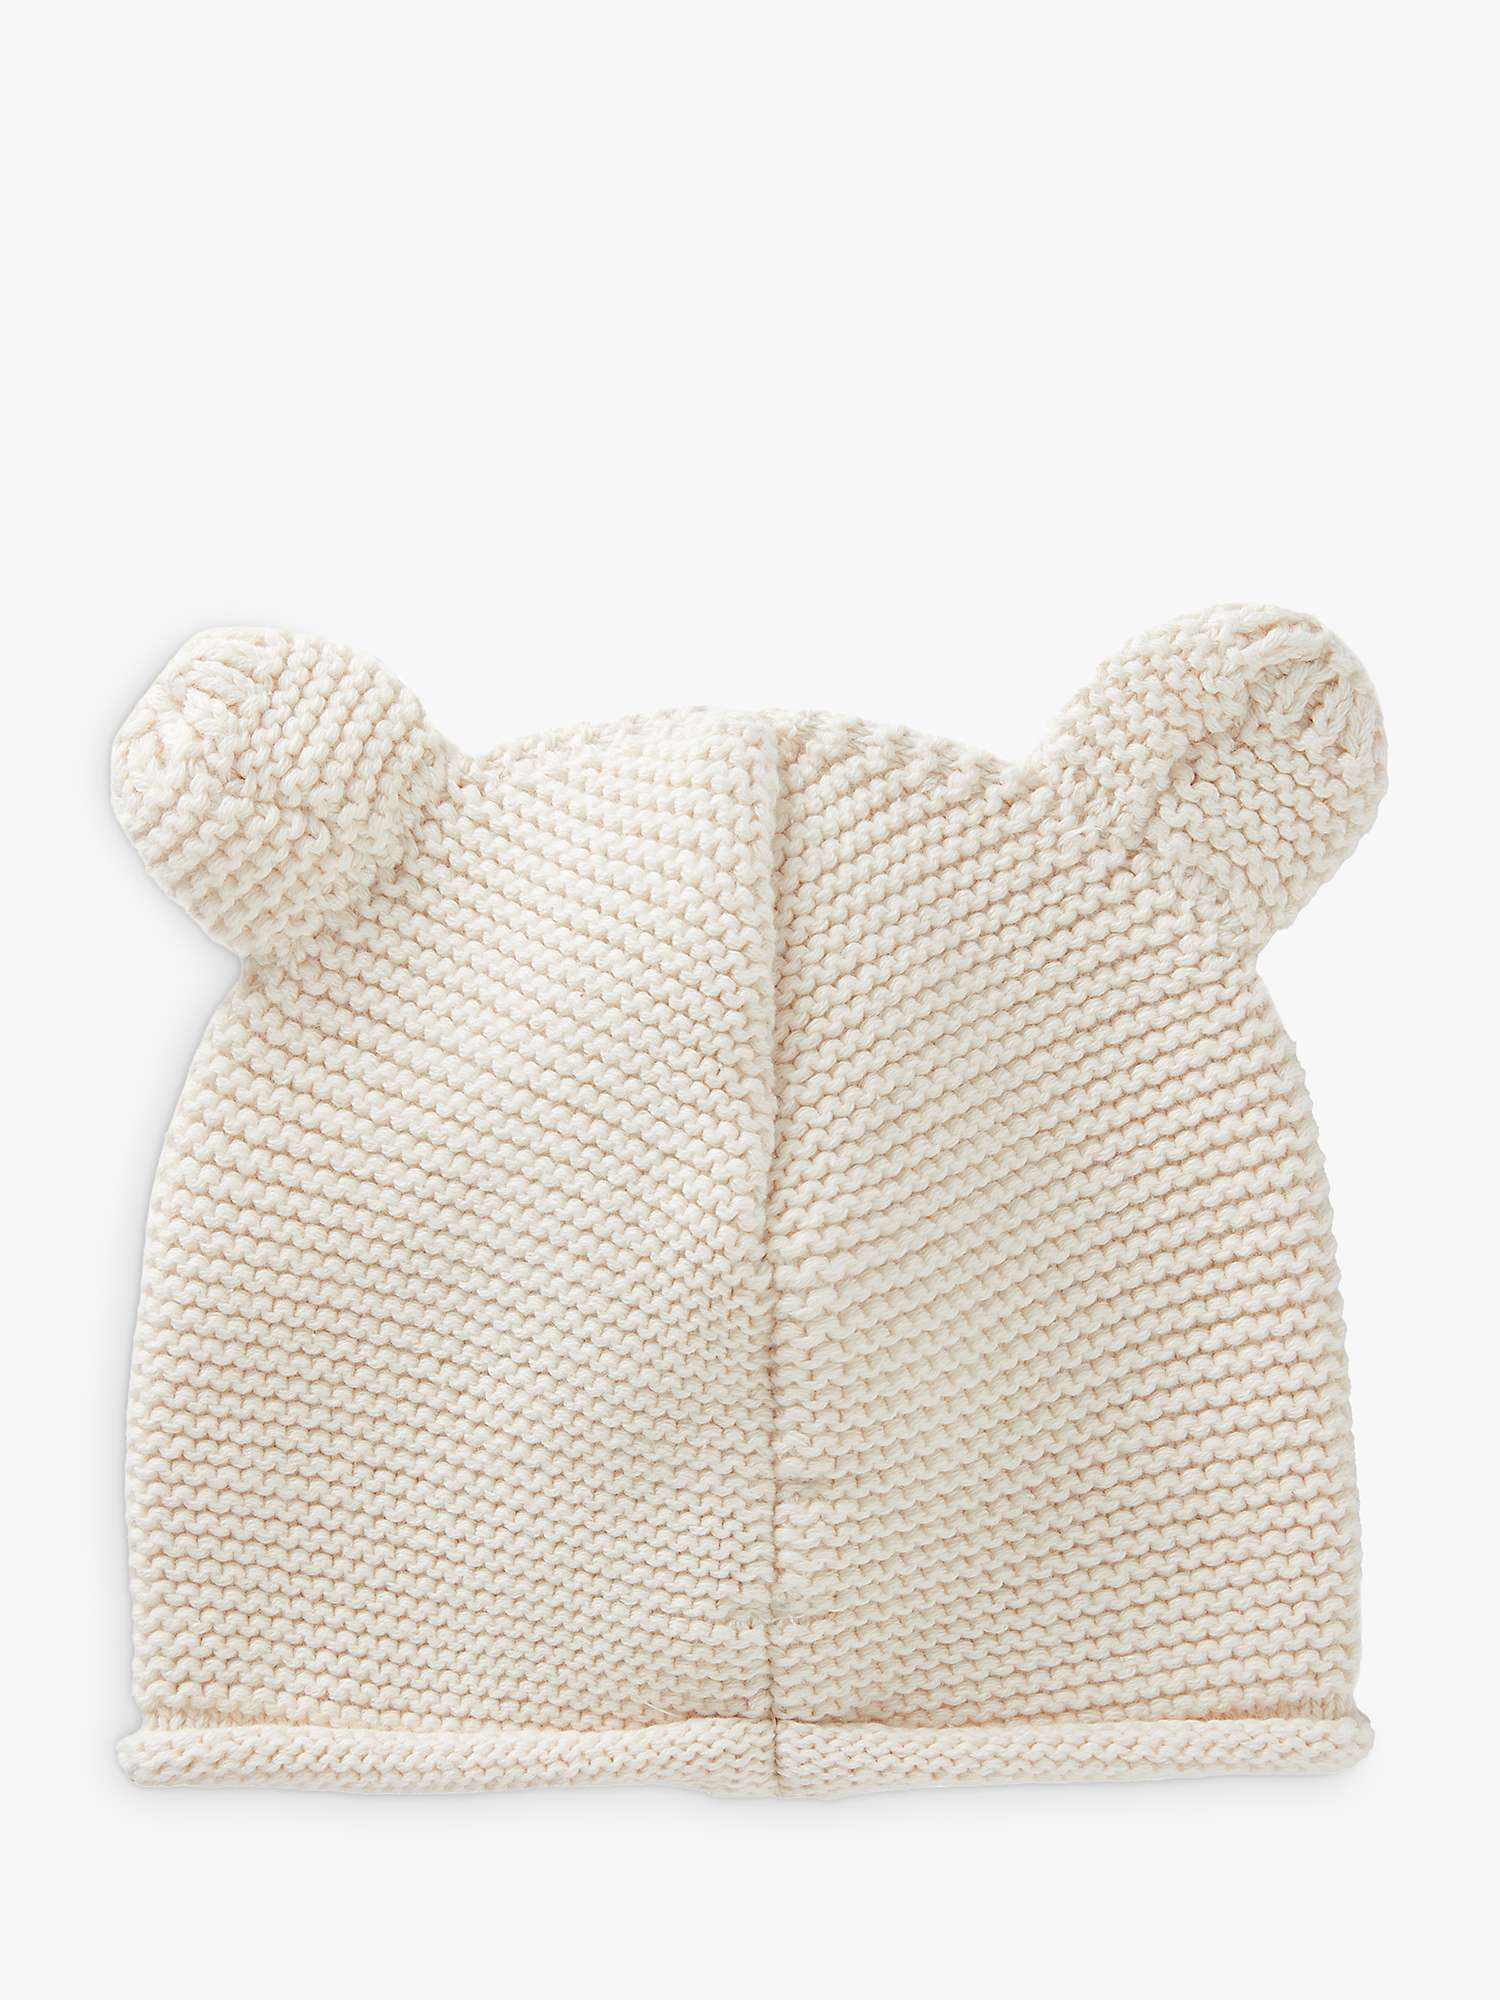 Buy Benetton Baby Tricot Animal Face Knit Hat Online at johnlewis.com